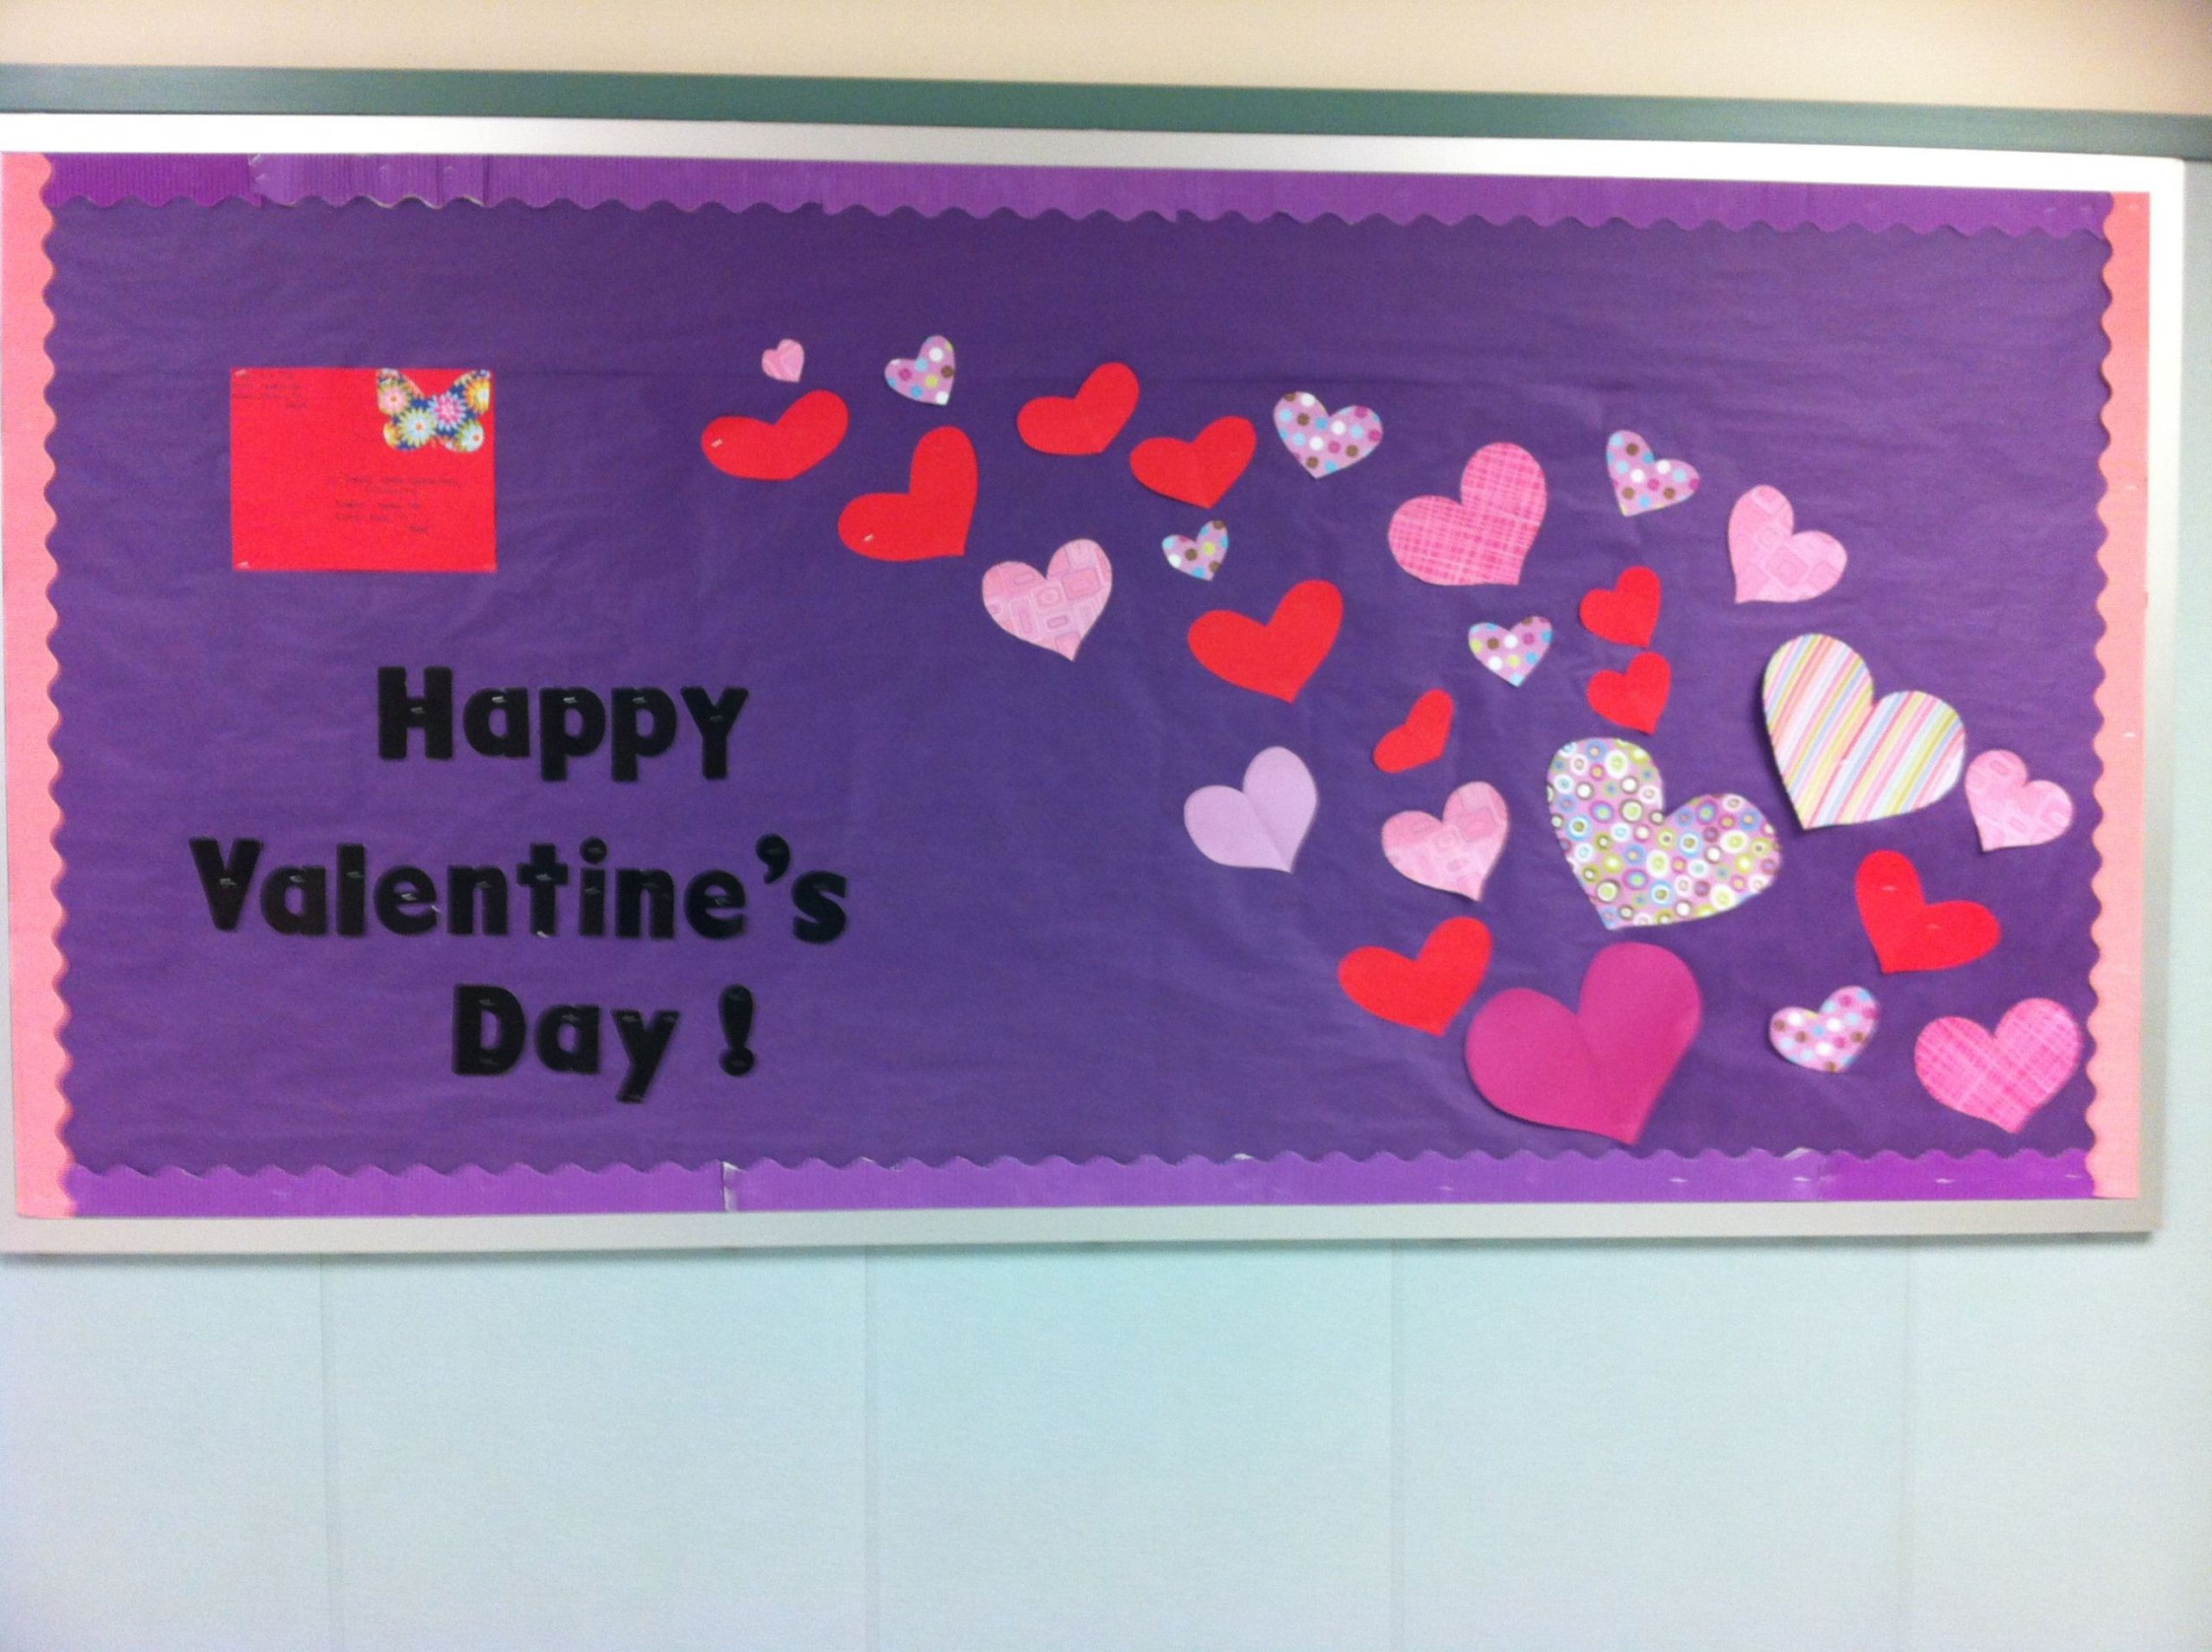 Valentines Day Bulletin Board Ideas For Preschool
 Valentines Bulletin Board Bulletin board ideas